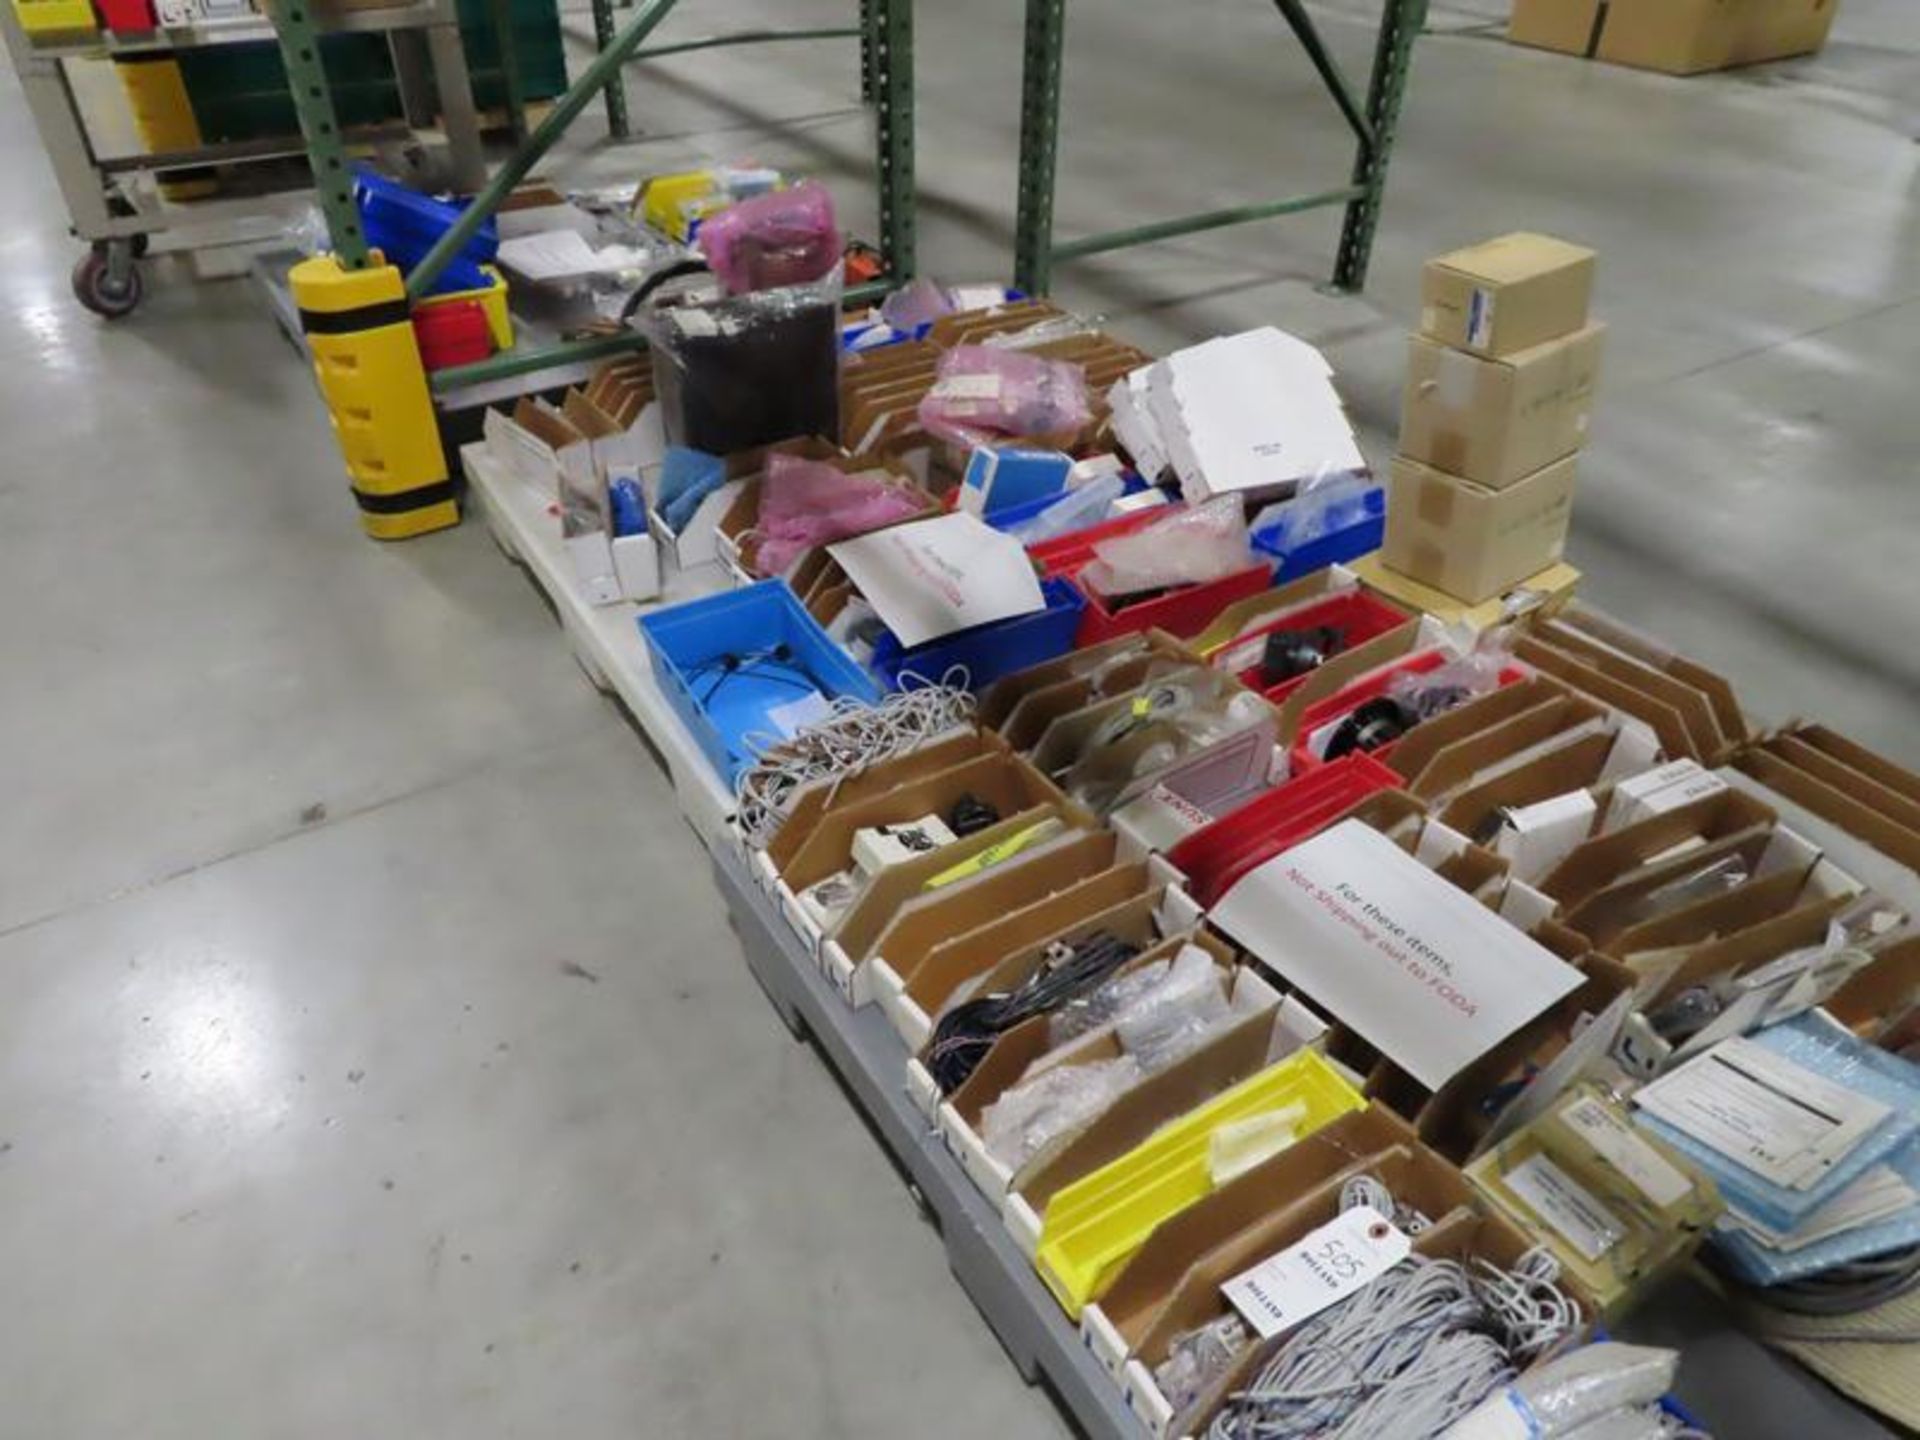 Spill Kits, Misc Keyance, Omiron and other parts, 3 plastic pallets and rolling cart